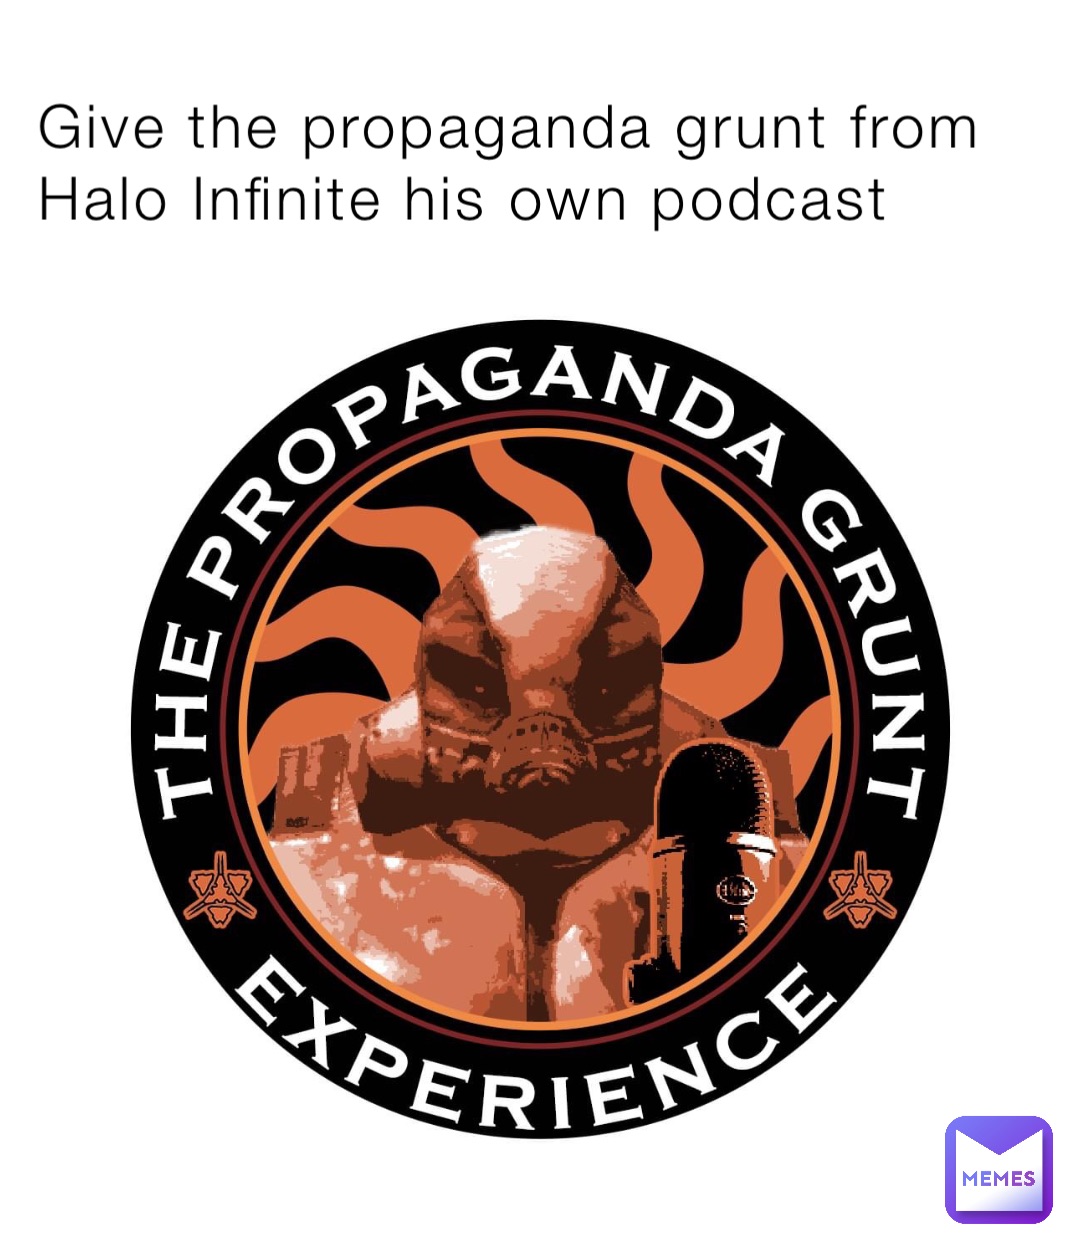 Give the propaganda grunt from Halo Infinite his own podcast